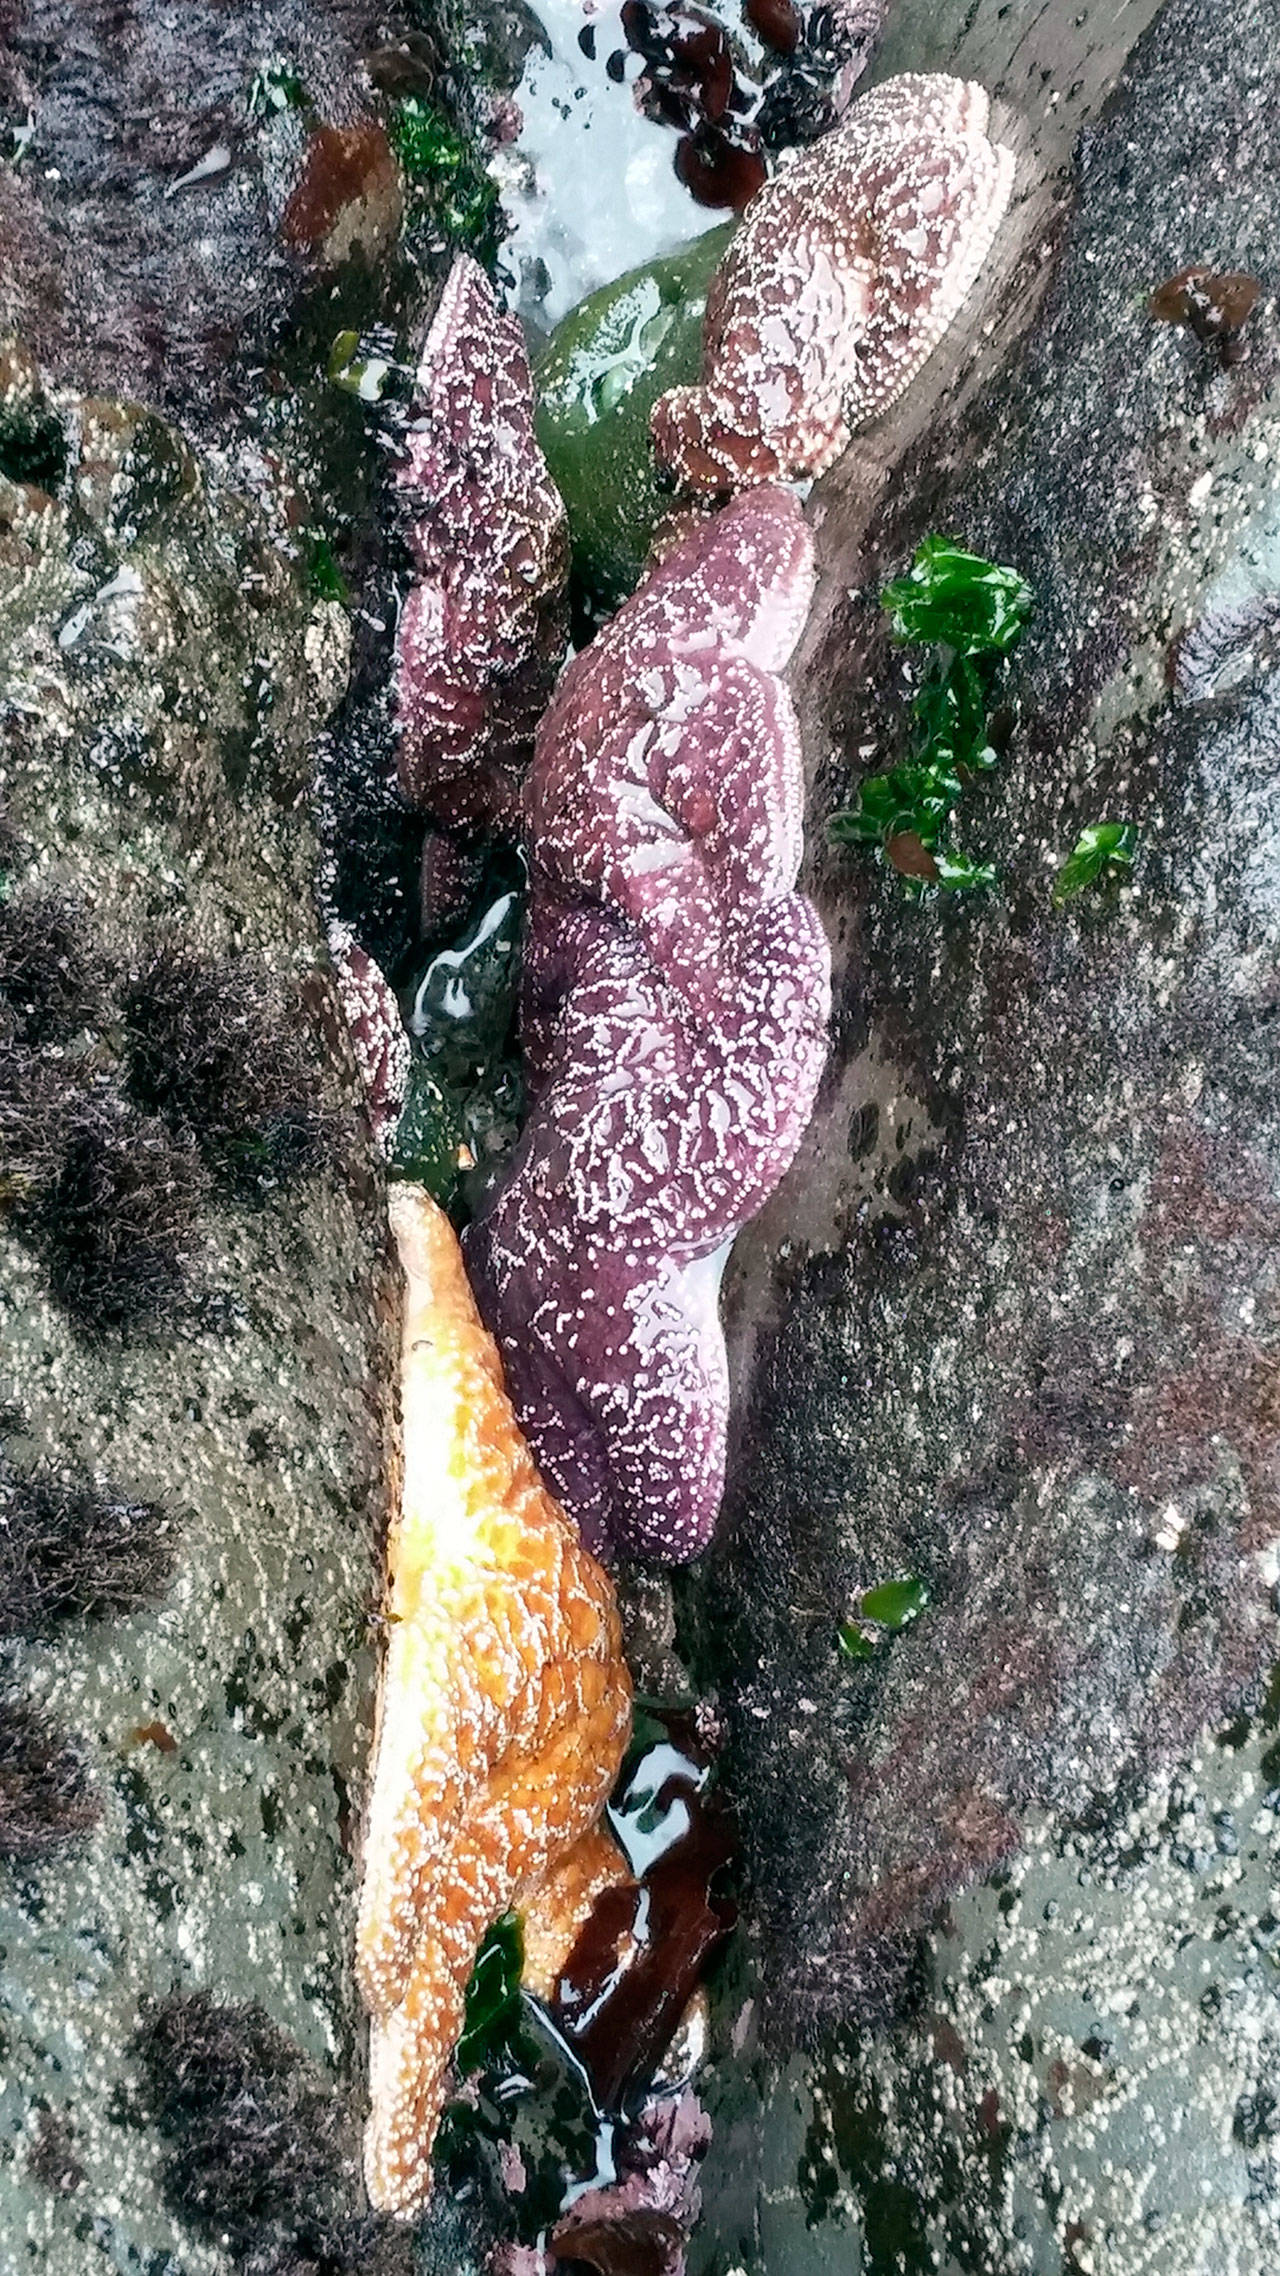 Sea stars cling to rocks at low tide at Rialto Beach in Olympic National Park this summer. (Michael J. Foster/Peninsula Daily News)